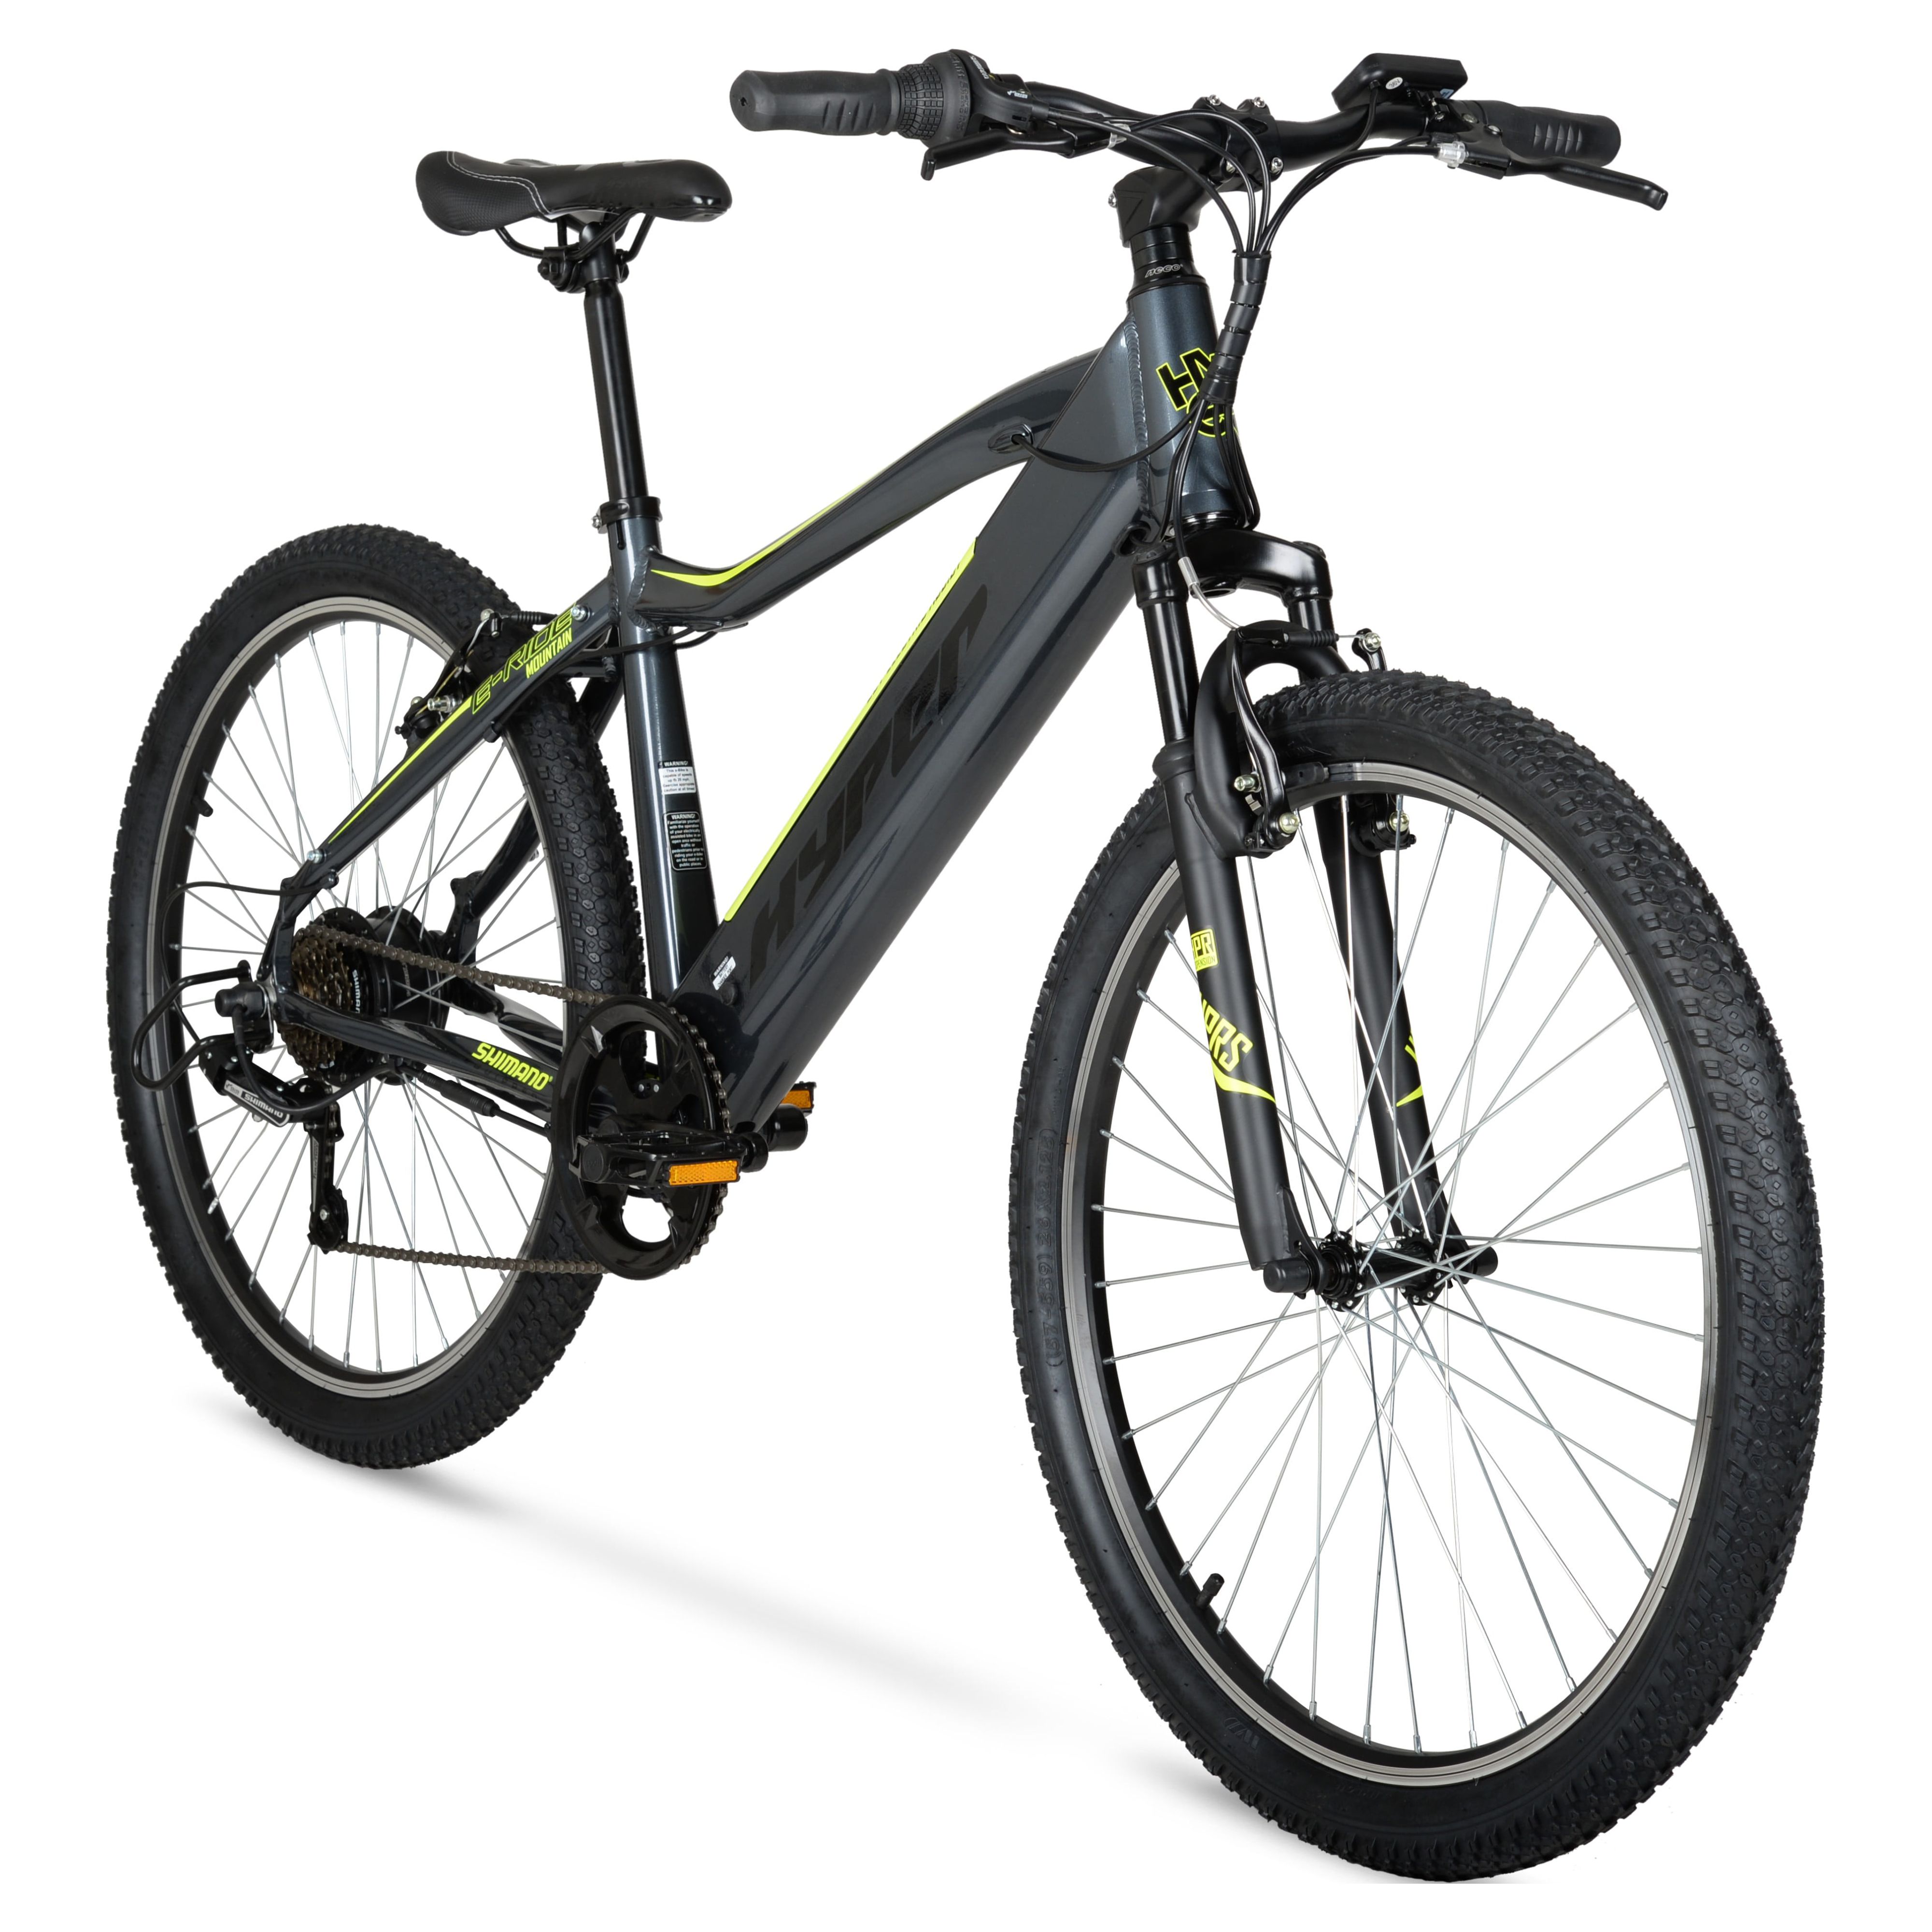 Hyper Bicycles 26" 36V Electric Mountain Bike for Adults, Pedal-Assist, 250W E-Bike Motor, Black - image 1 of 17